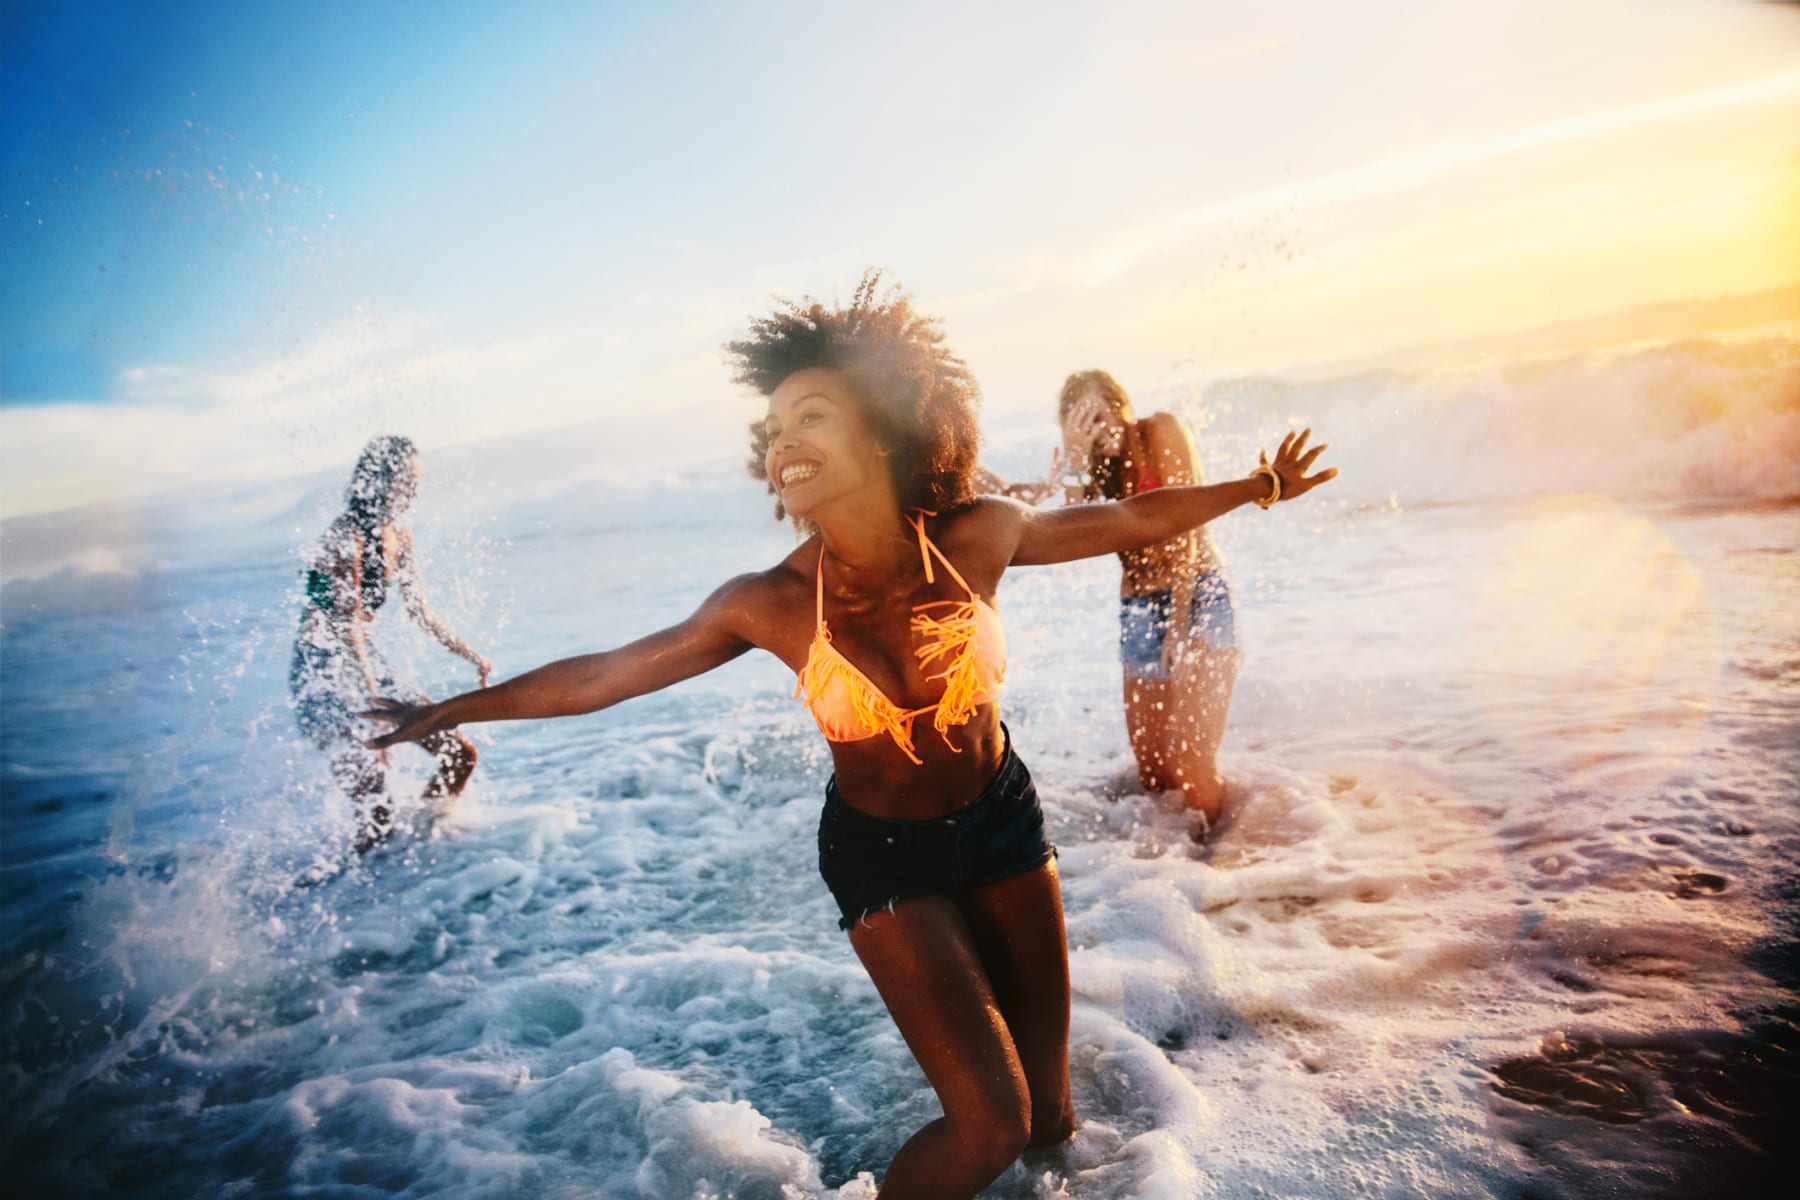 Women play in water at the beach.